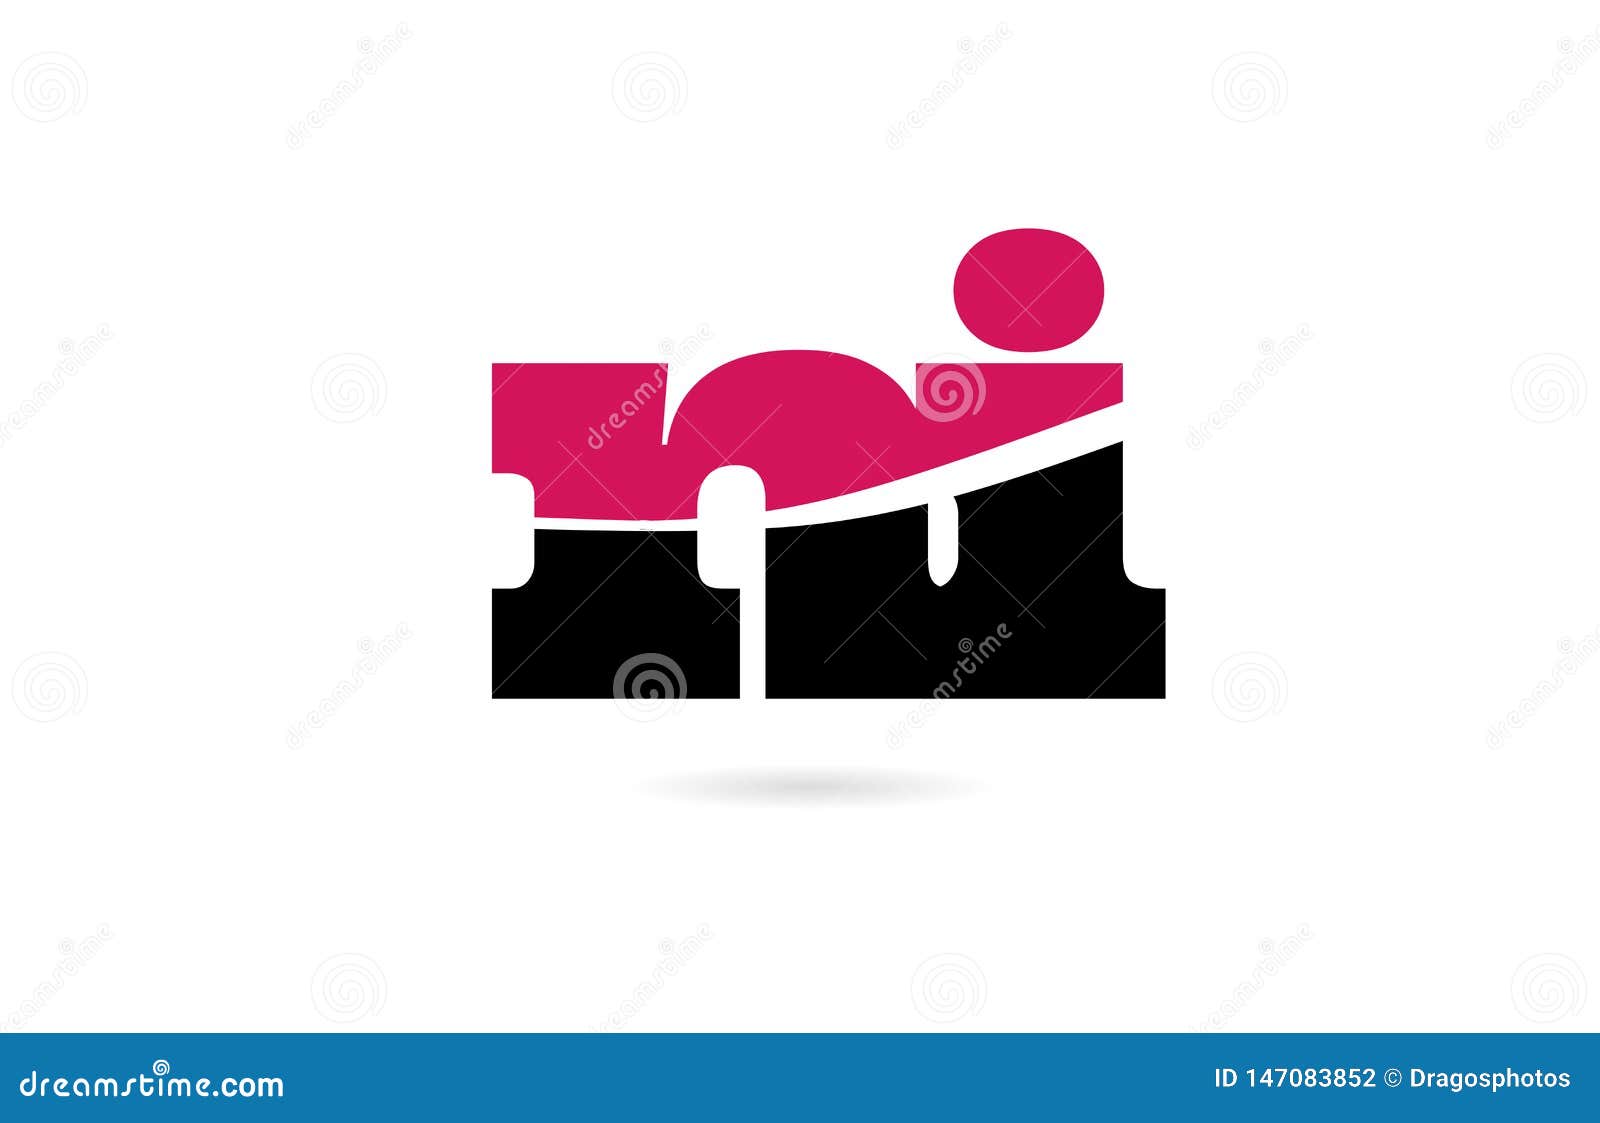 ni n i pink and black alphabet letter combination logo icon 